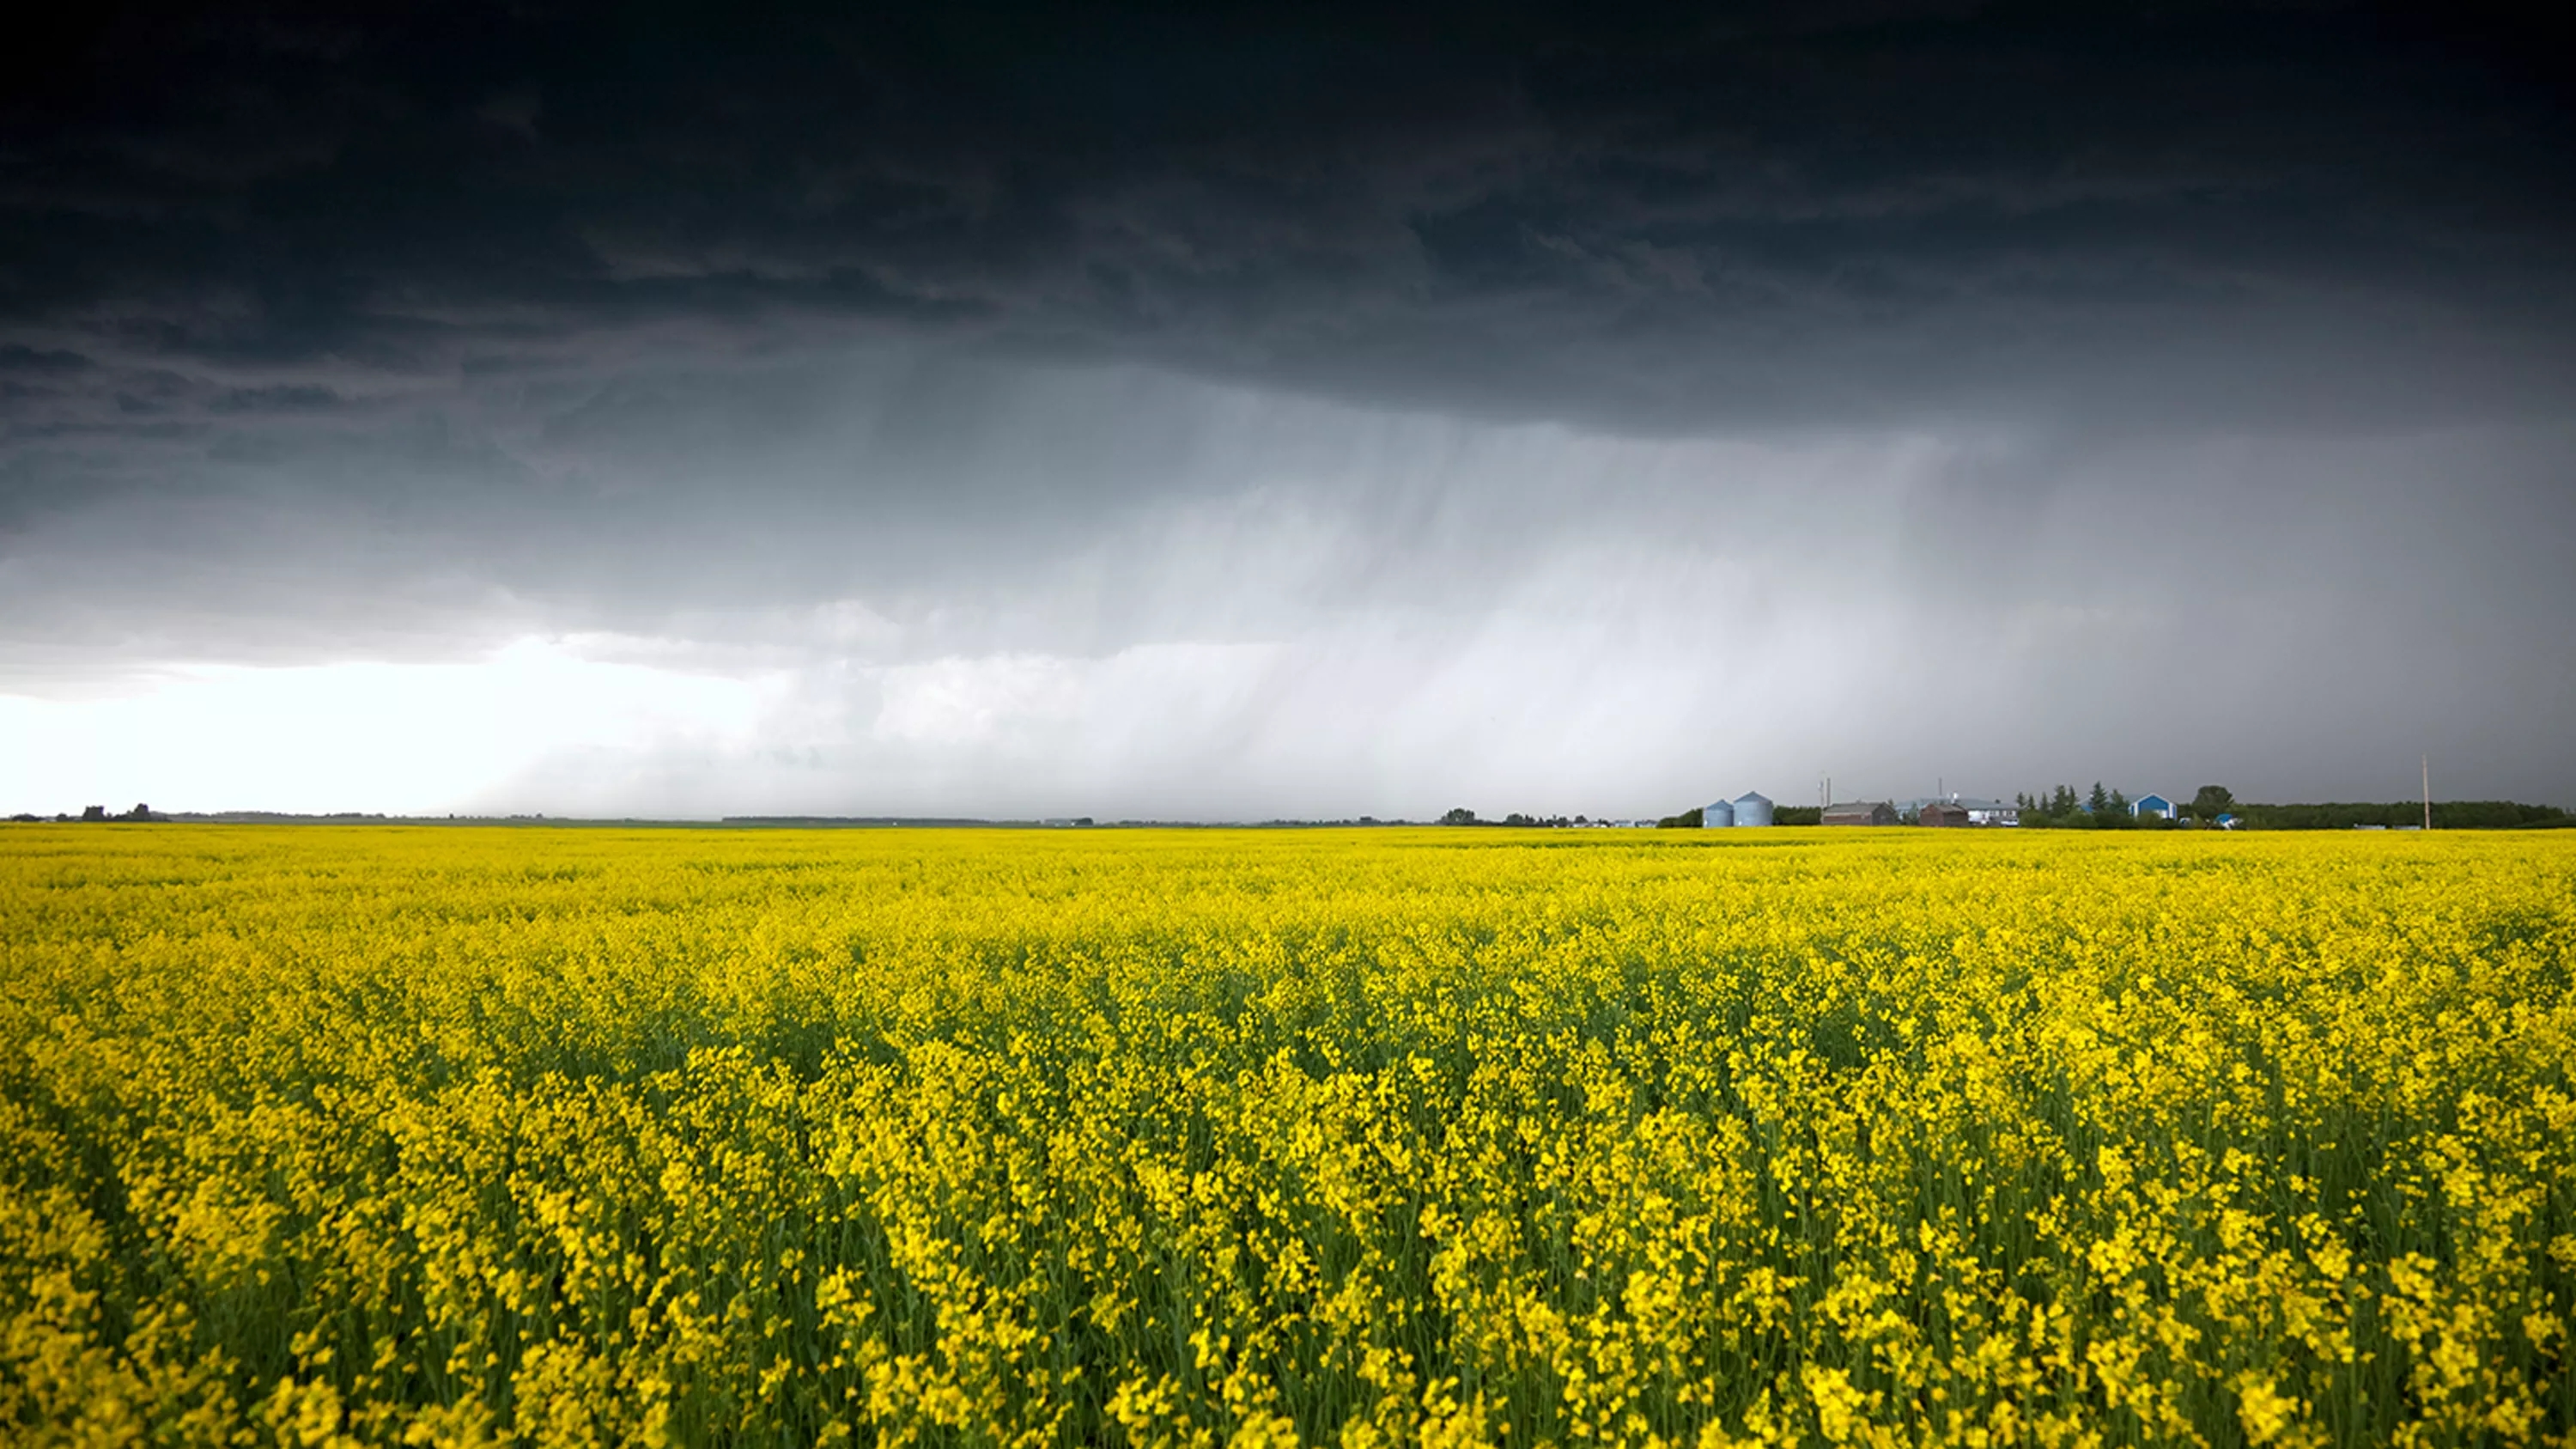 A dramatic thunderstorm over a bright yellow rape field.